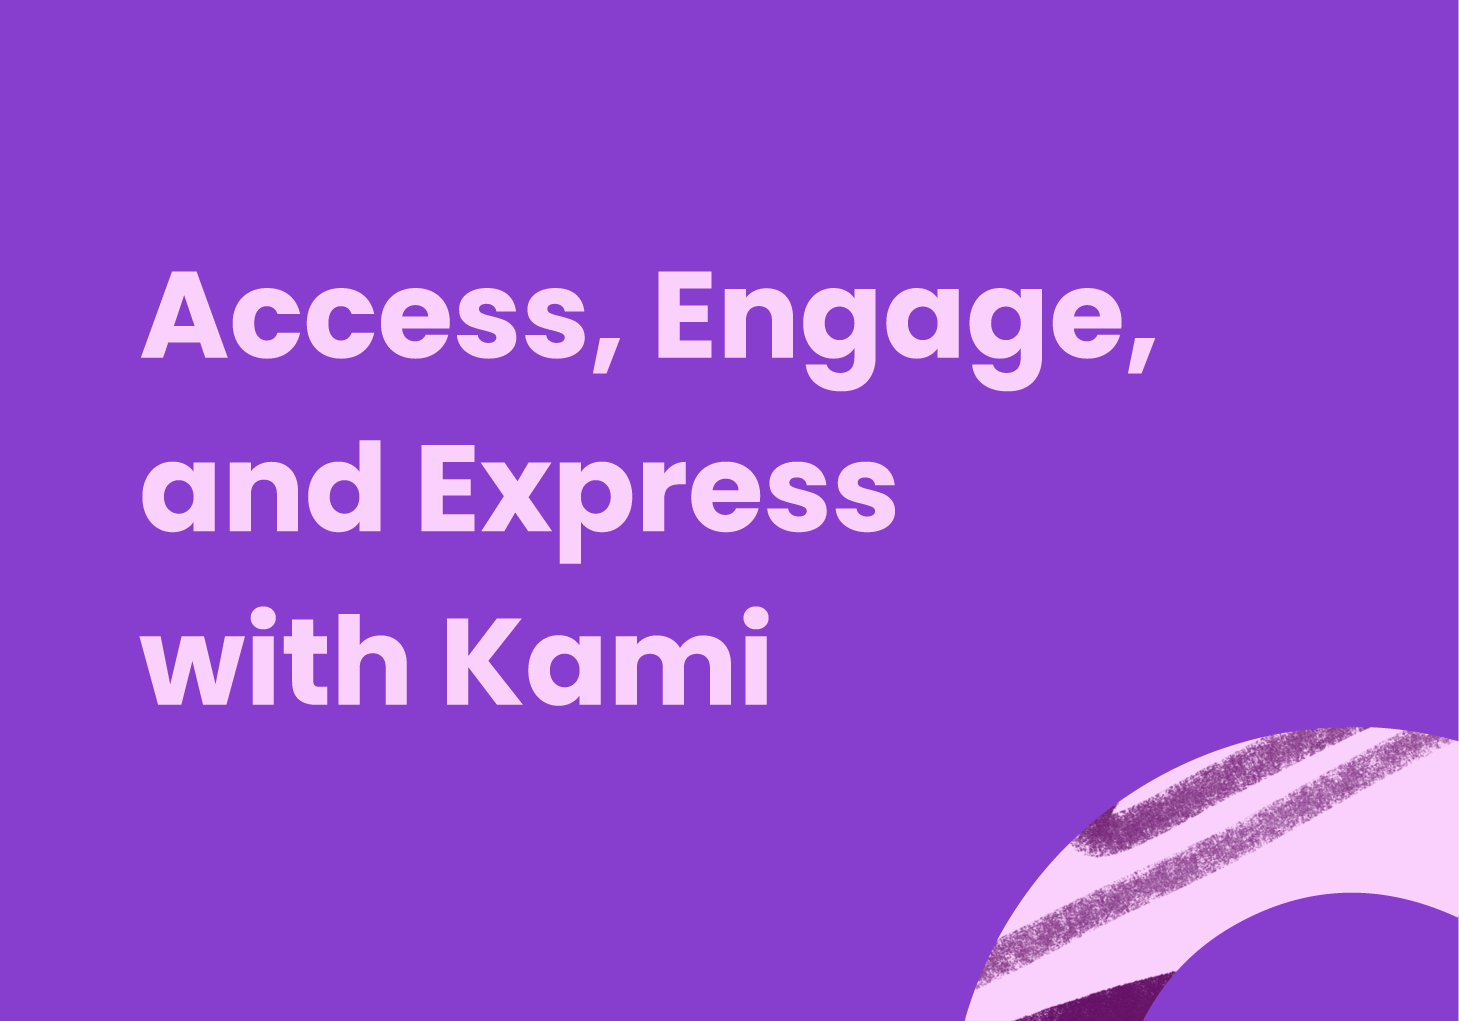 Access, Engage, and Express with Kami!